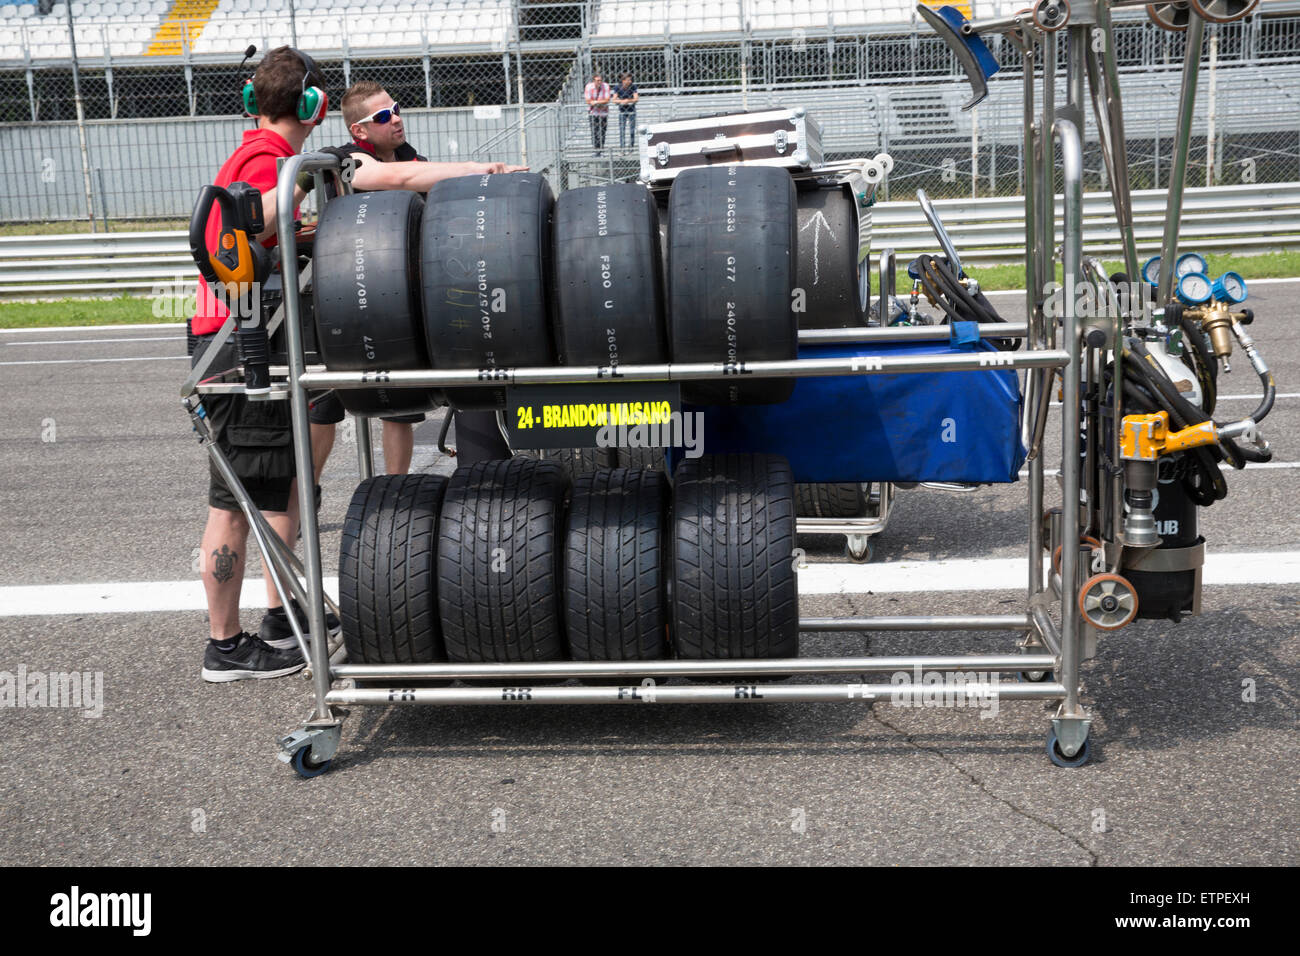 Monza, Italy - May 30, 2015: A man pushes a rack of tyres at the Autodromo Nazionale di Monza Circuit Stock Photo